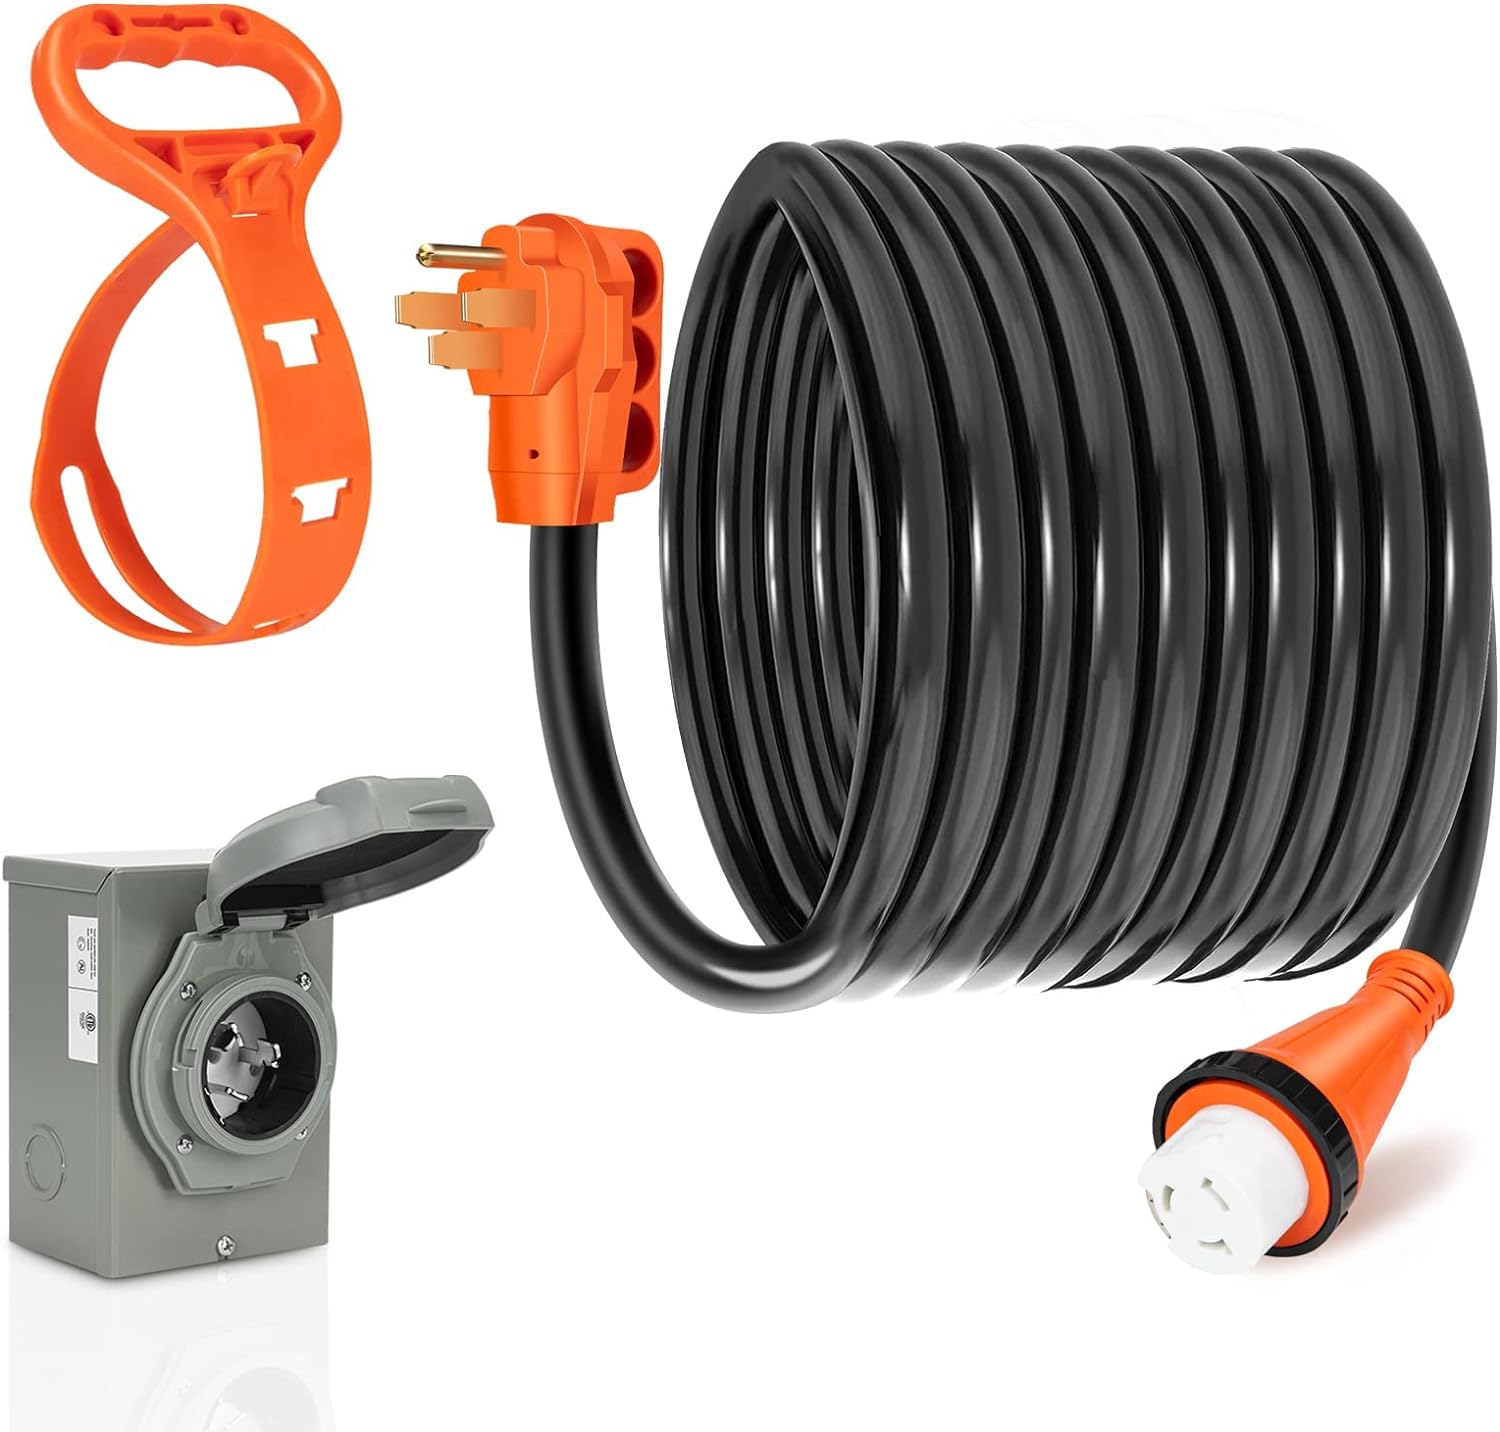 WELLUCK 50 Amp Emergency Power Combo Kit with SS2-50 Inlet Box and 15 FT Power Cord, 50A Generator Power Inlet Box, NEMA 14-50P to SS2-50R RV Power Extension Cord with Grip Handle, ETL Listed - WELLUCK Emergency Power Combo Kit Review